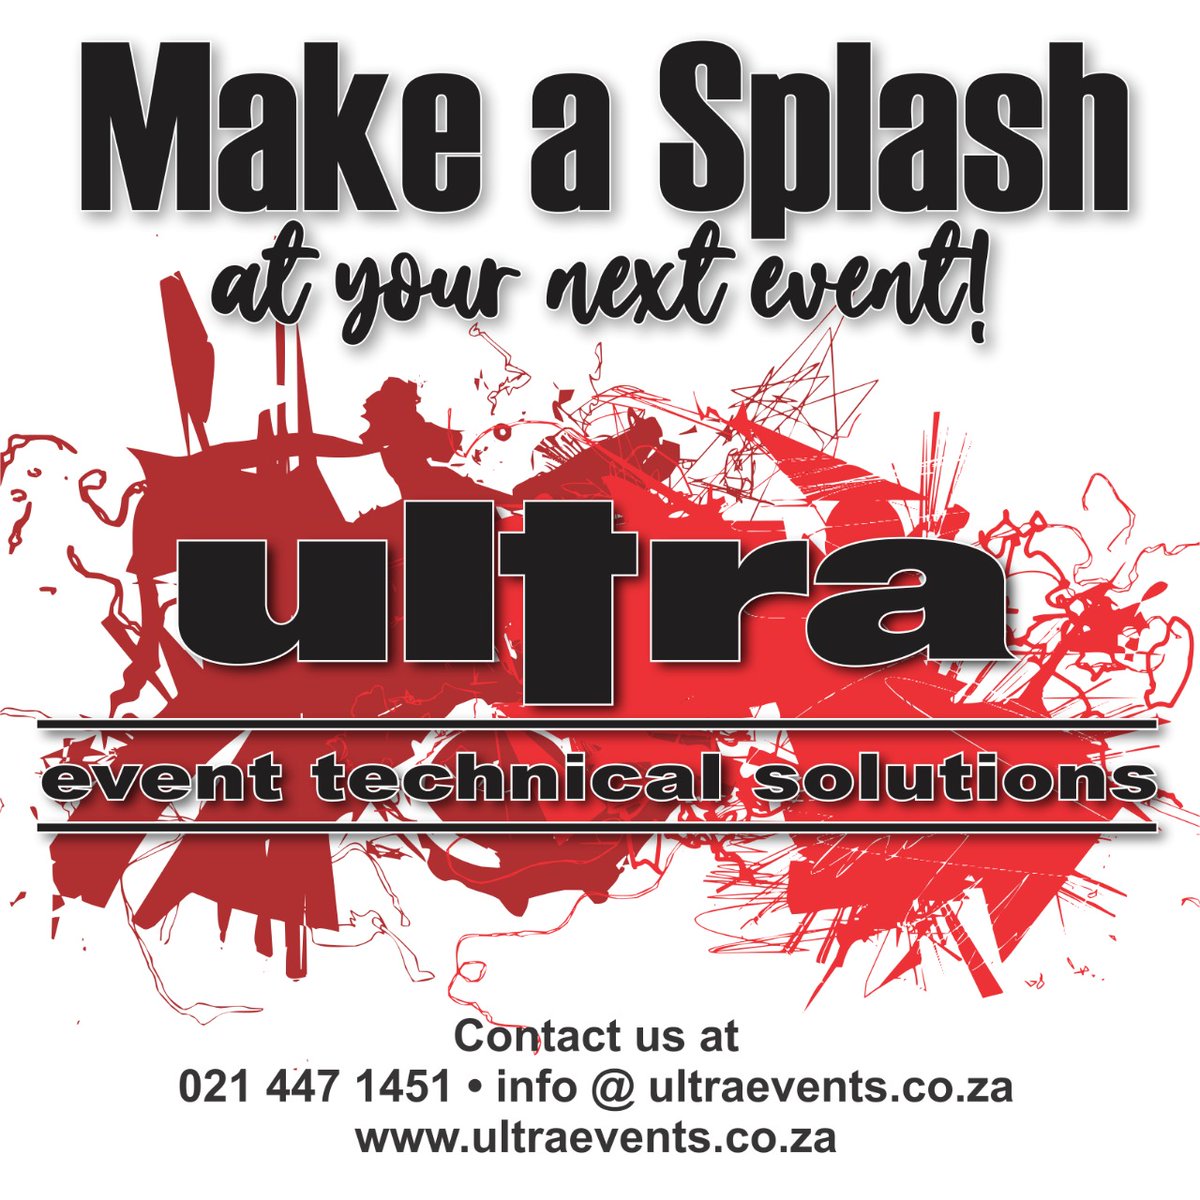 Make a splash at your next event!

Head over to ultraevents.co.za to find out how!

#onestopshop
#EventTechSupplier 
#UltraEventTechnicalSolutions